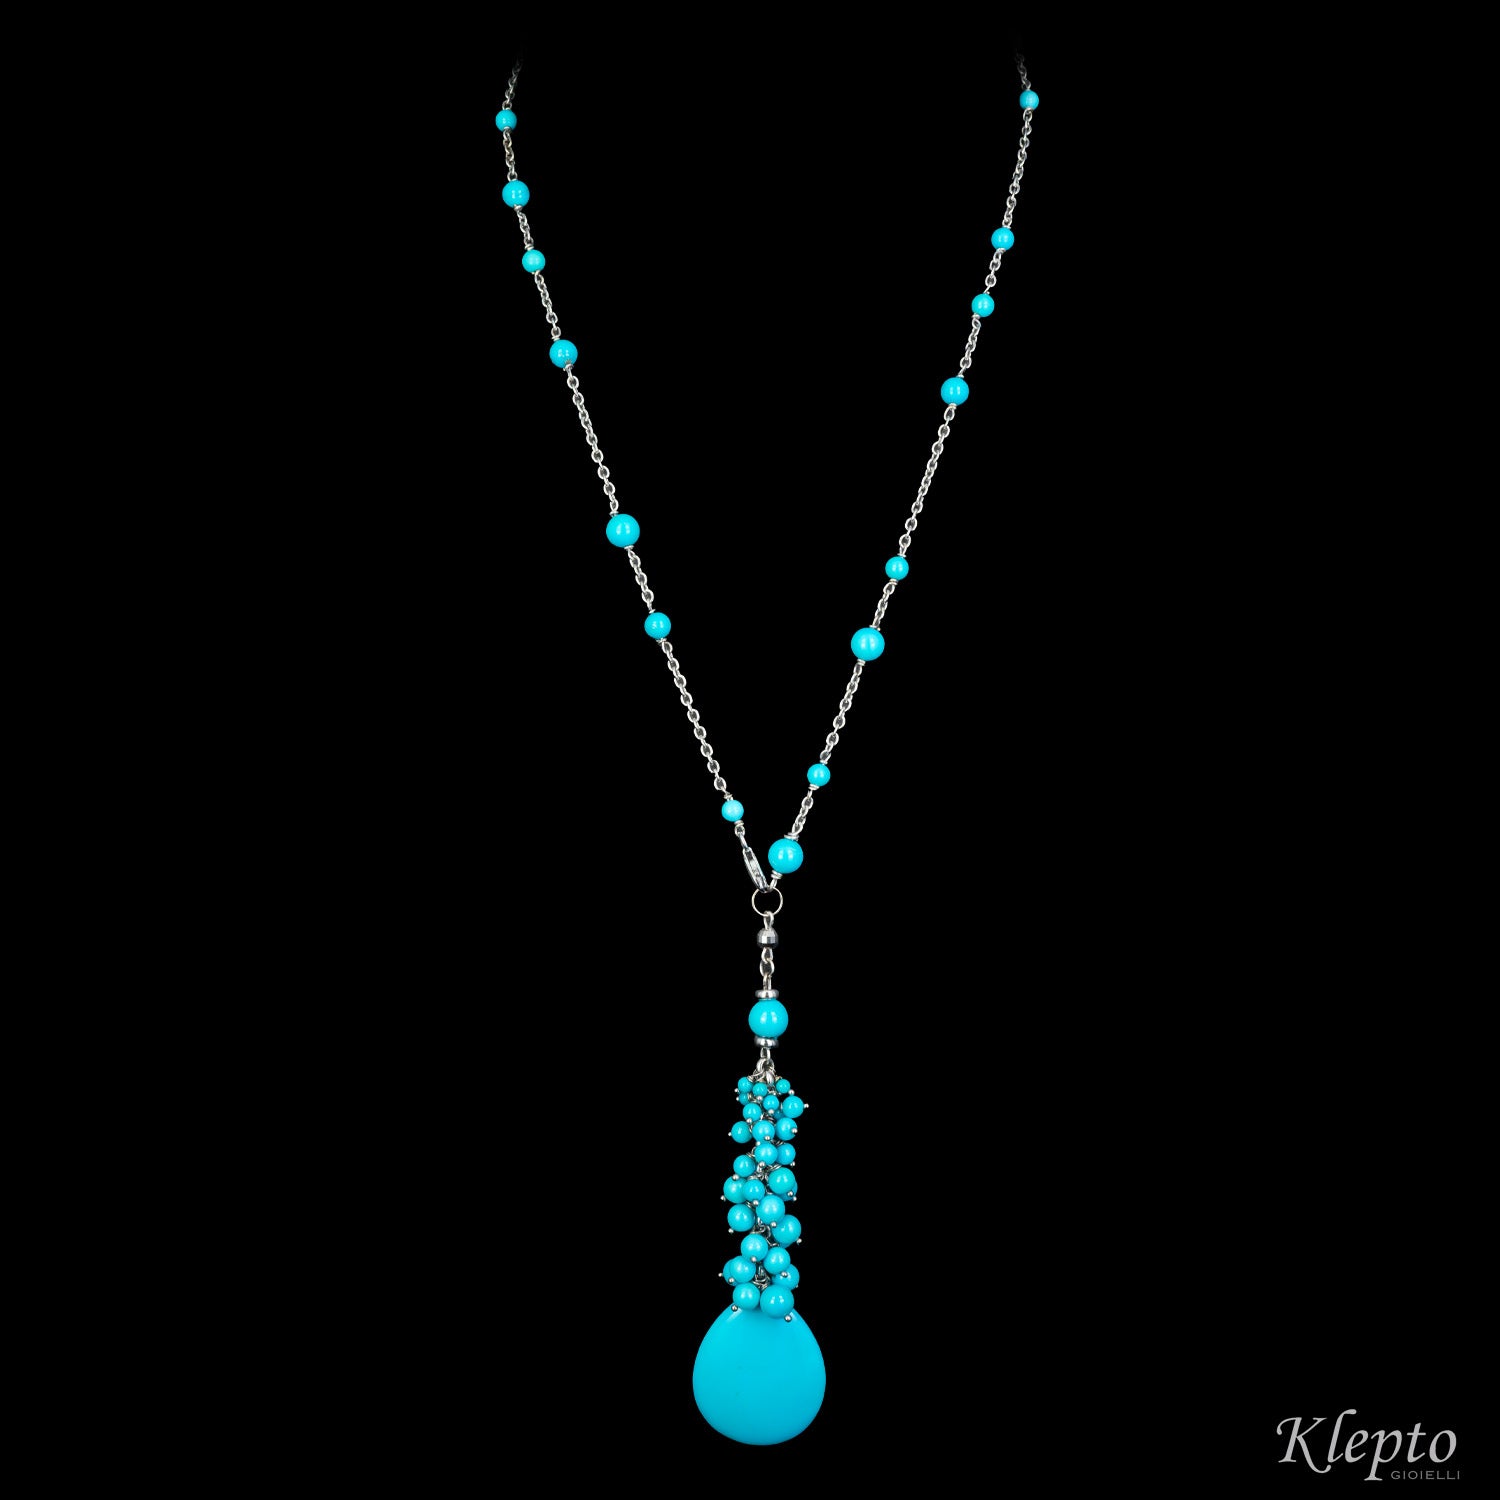 Tassel necklace in white gold with Turquoise